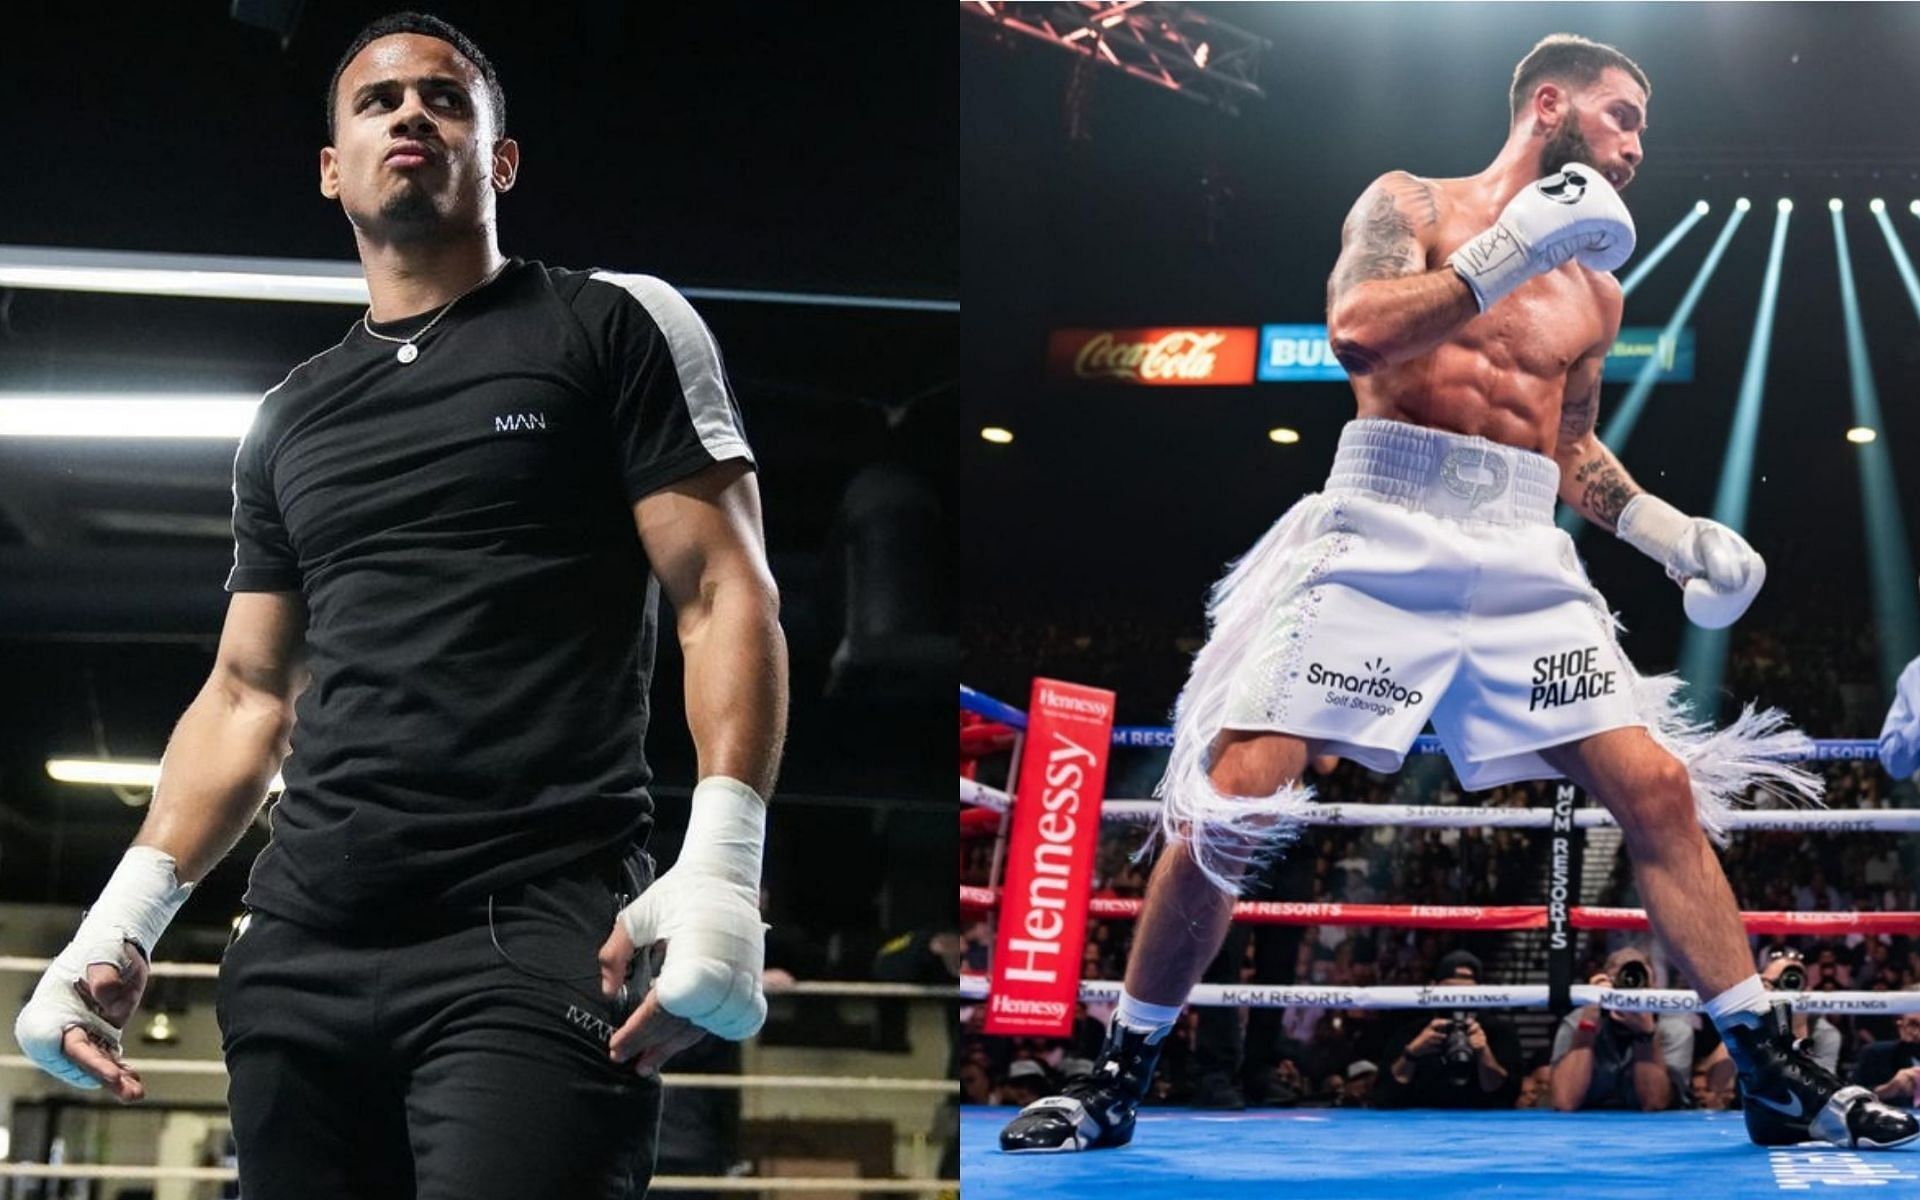 Rolly Romero (left) and Caleb Plant (right) [Images Courtesy: @rolliesss and @calebplant on Instagram]